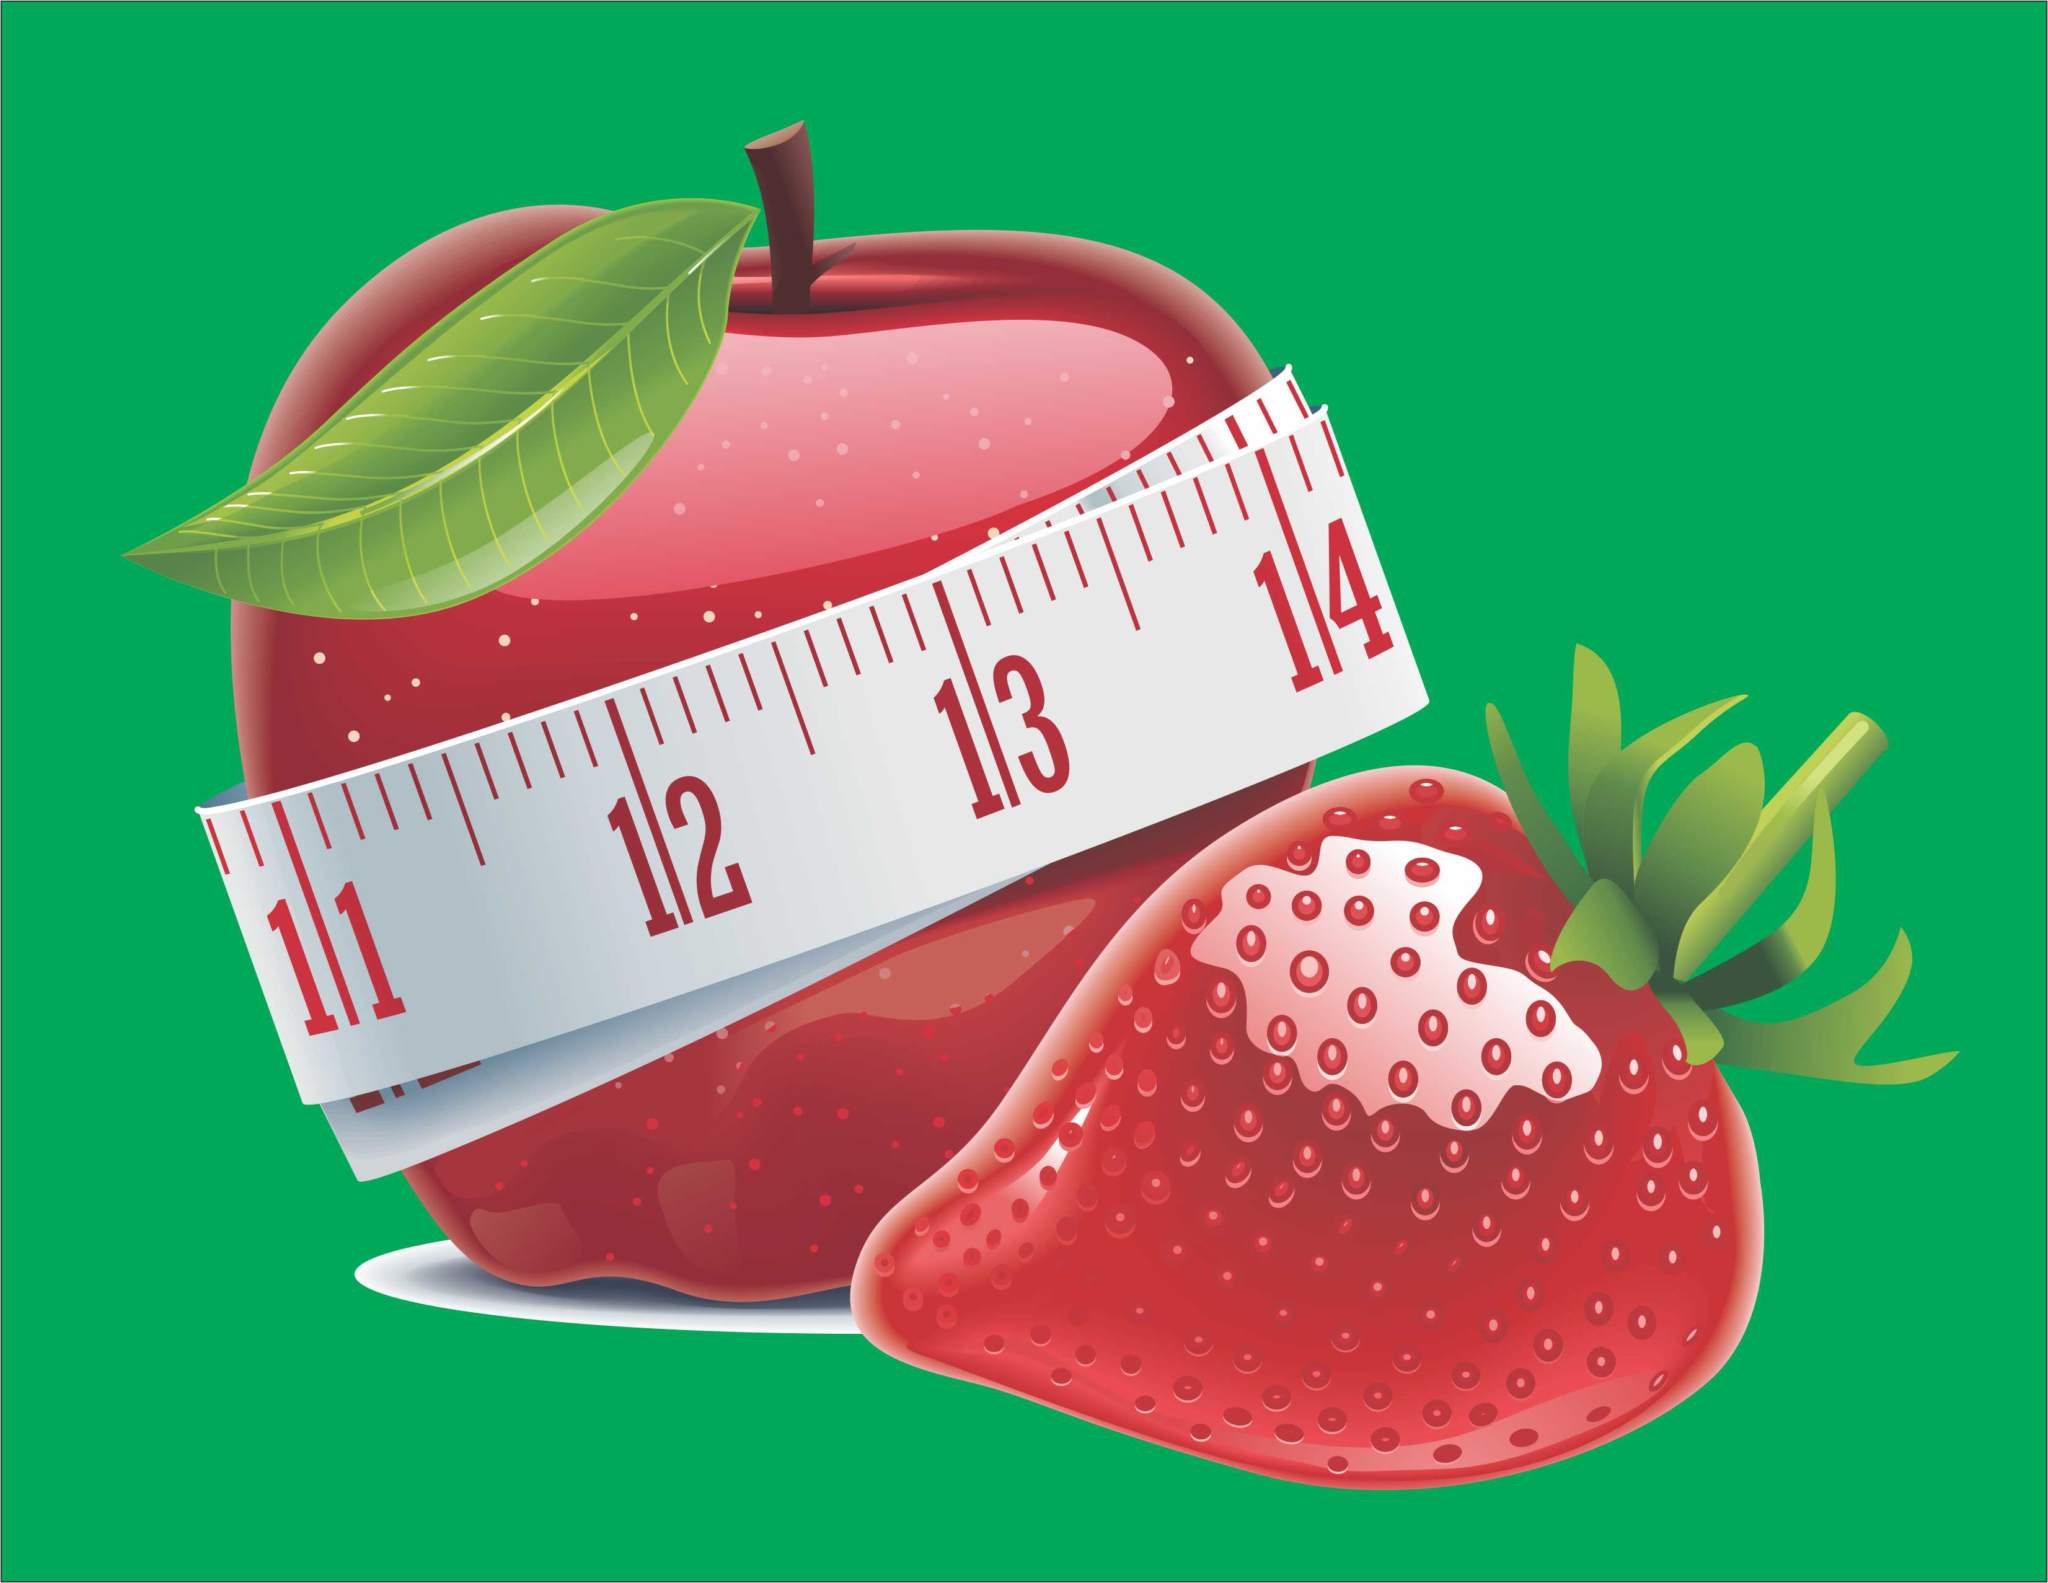 Measurement Strip over an Apple and Cherry